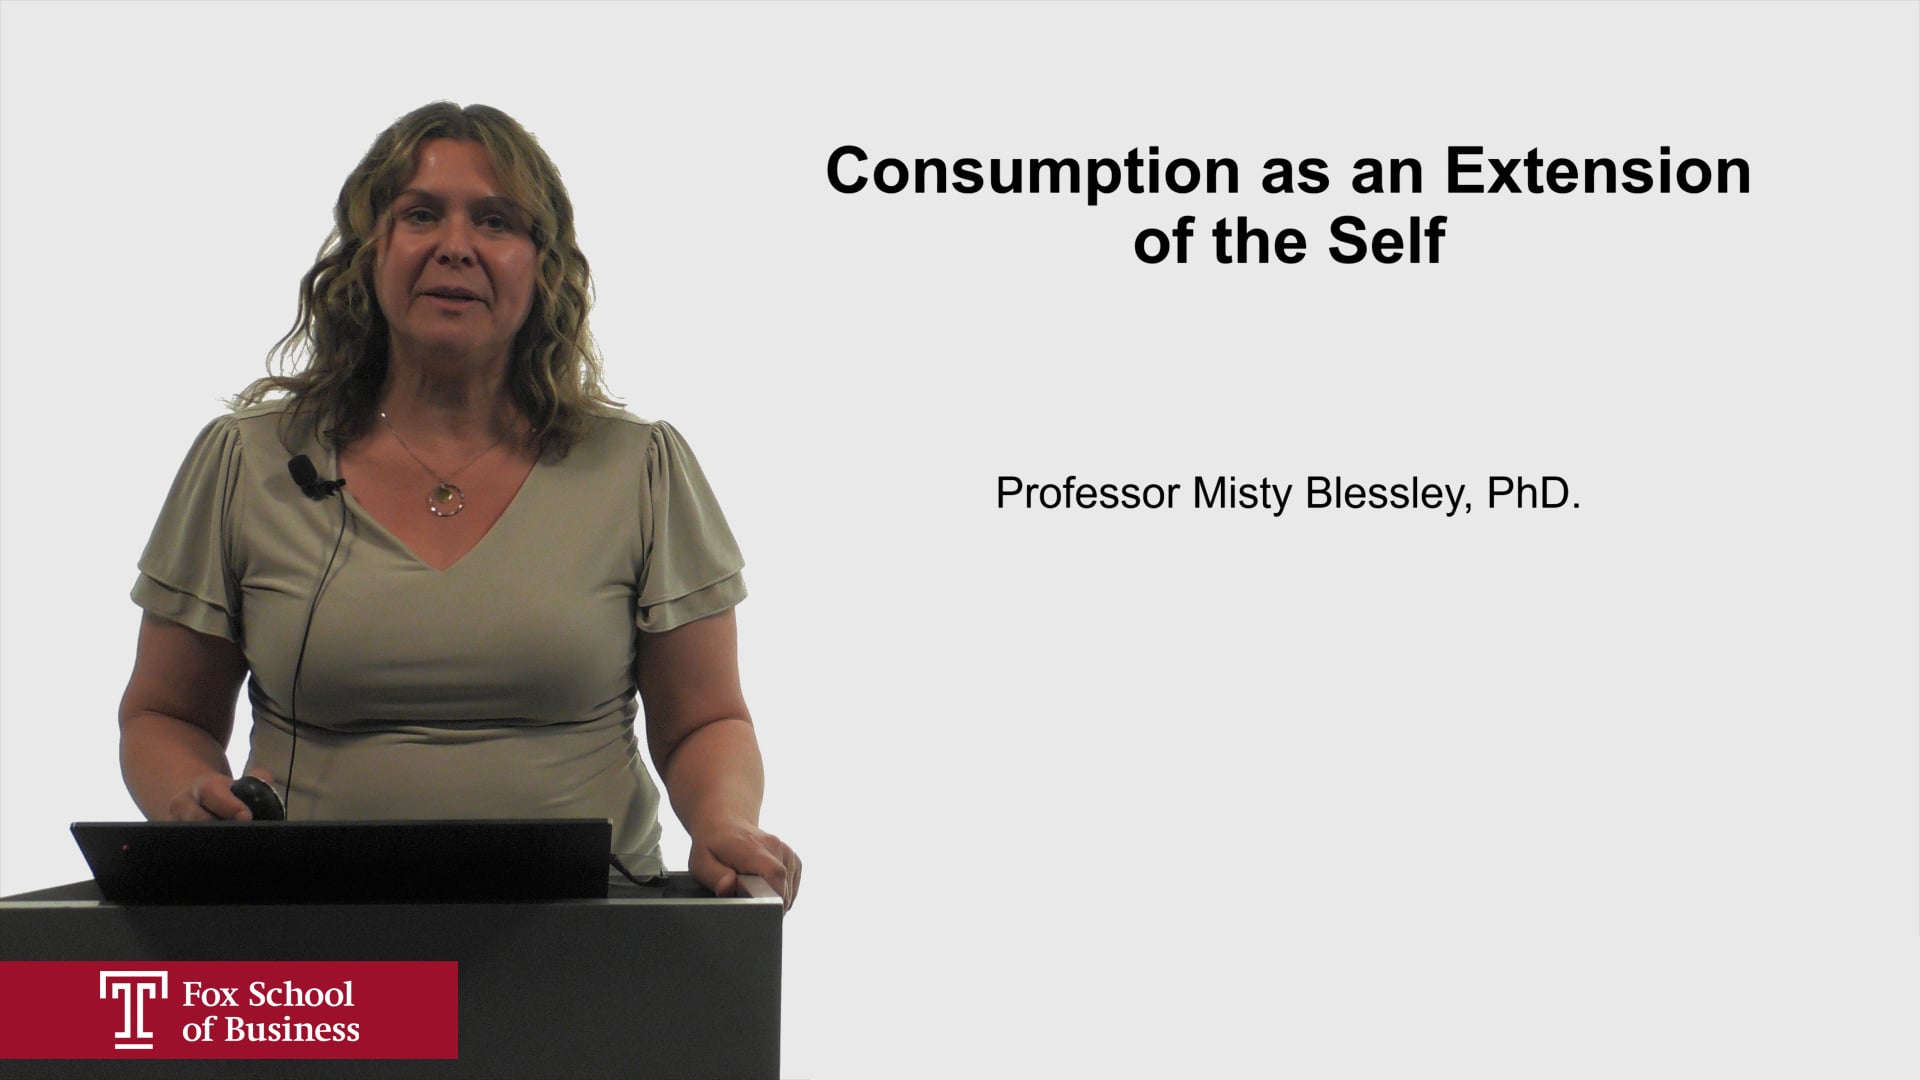 Consumption as an Extension of the Self